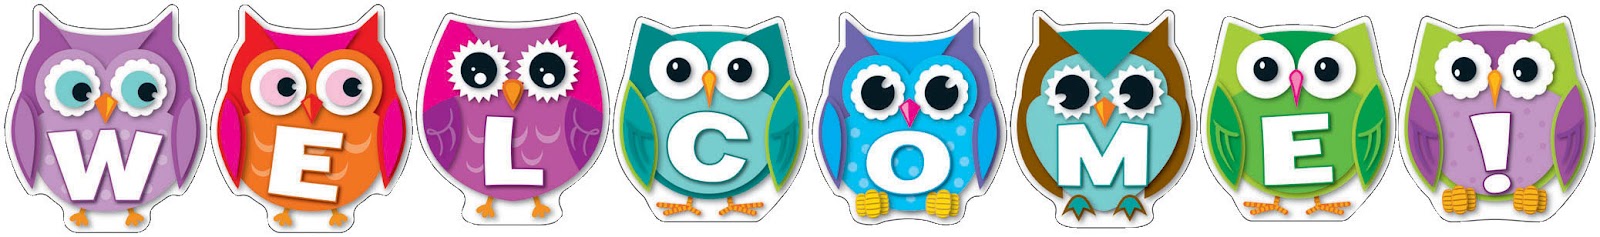 Welcome owl clipart images